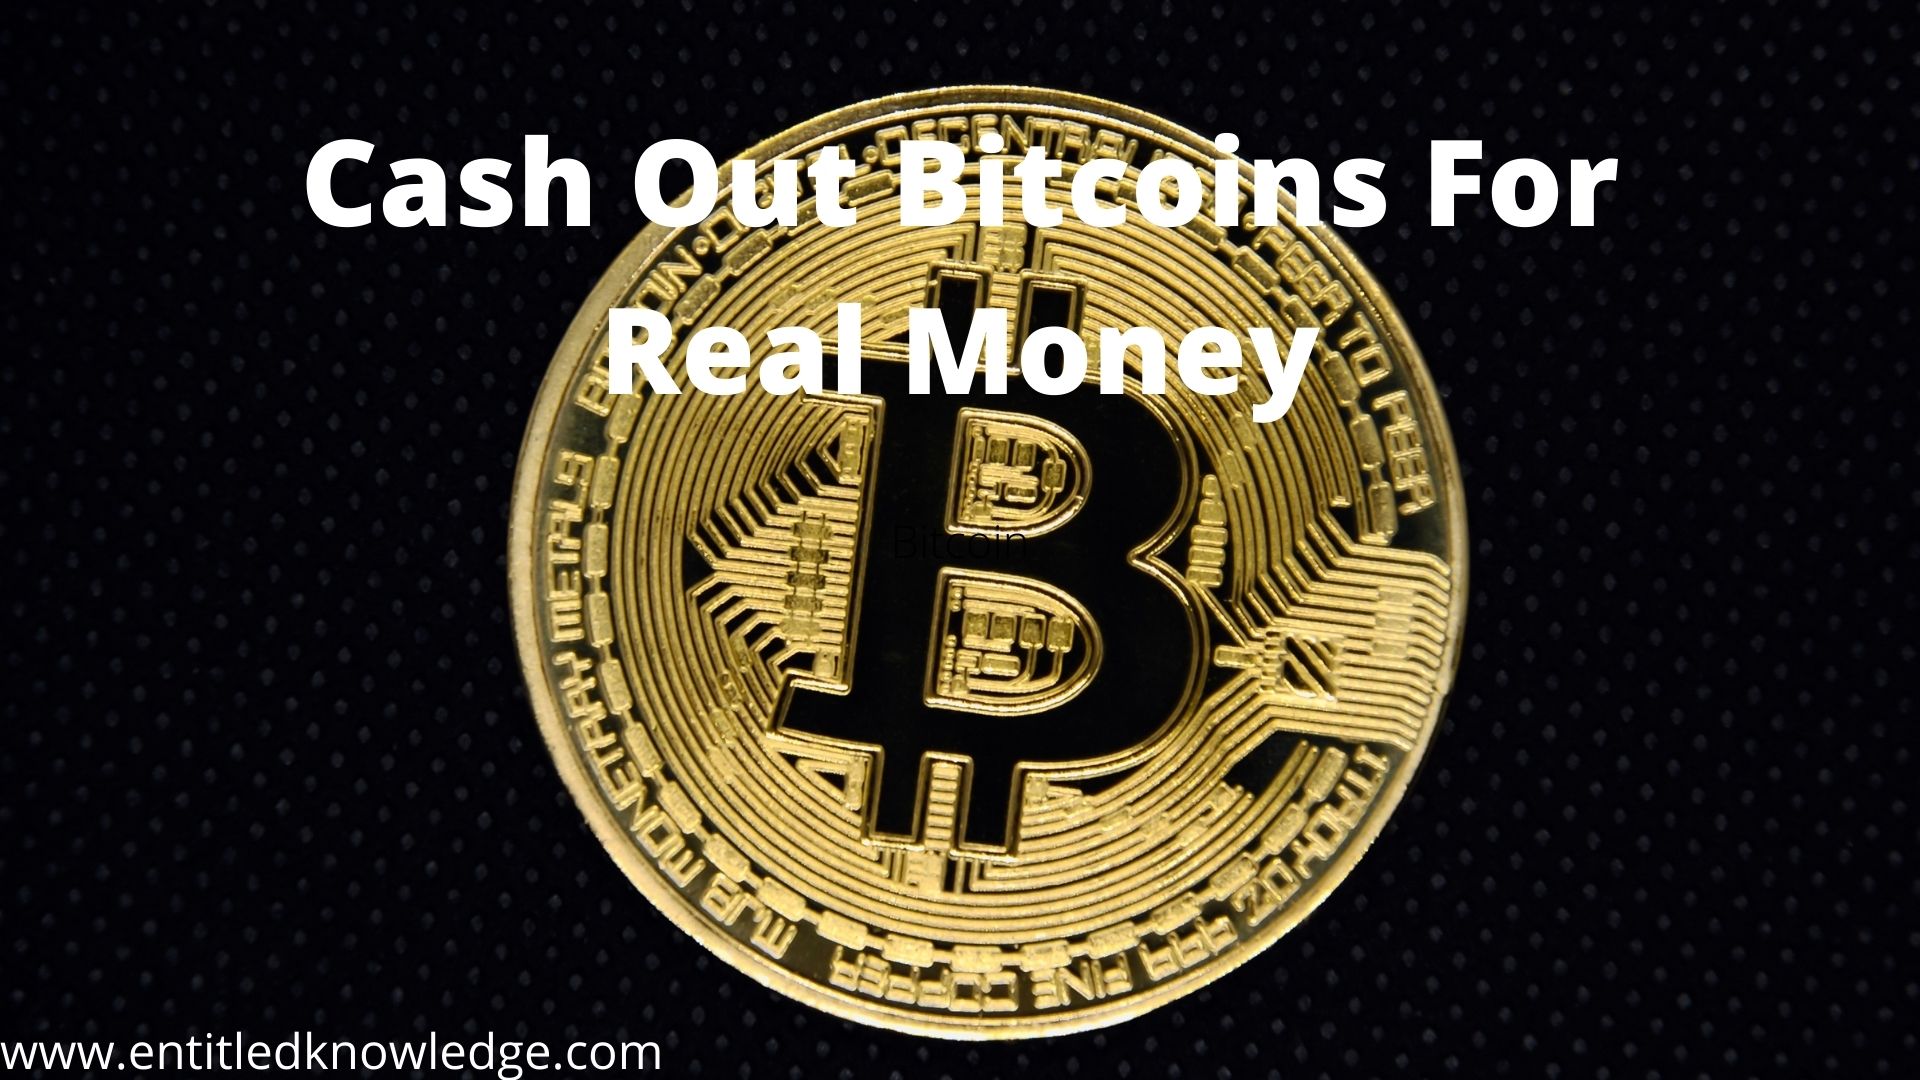 How To Cash Out Bitcoins For Real Money